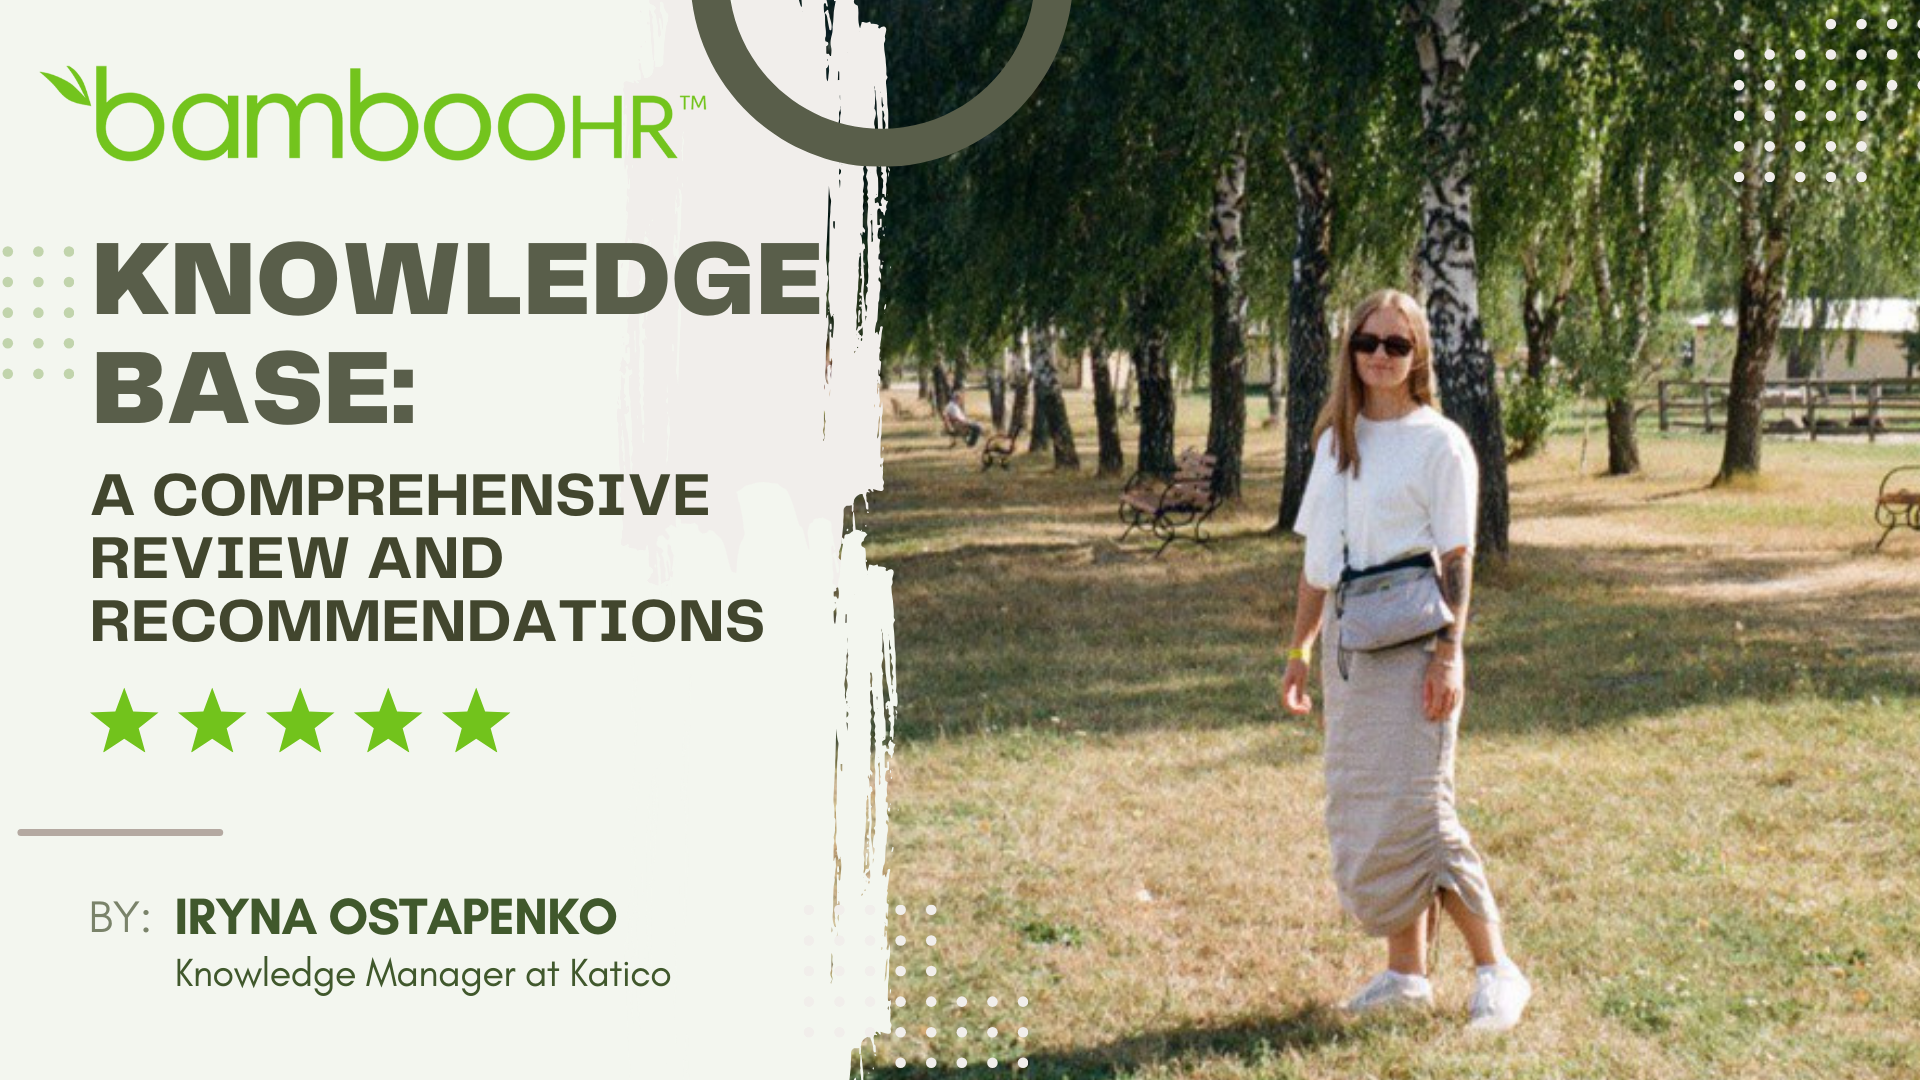 Iryna Ostapenko, Knowledge Manager at Katico. BambooHR Knowledge Base Review.